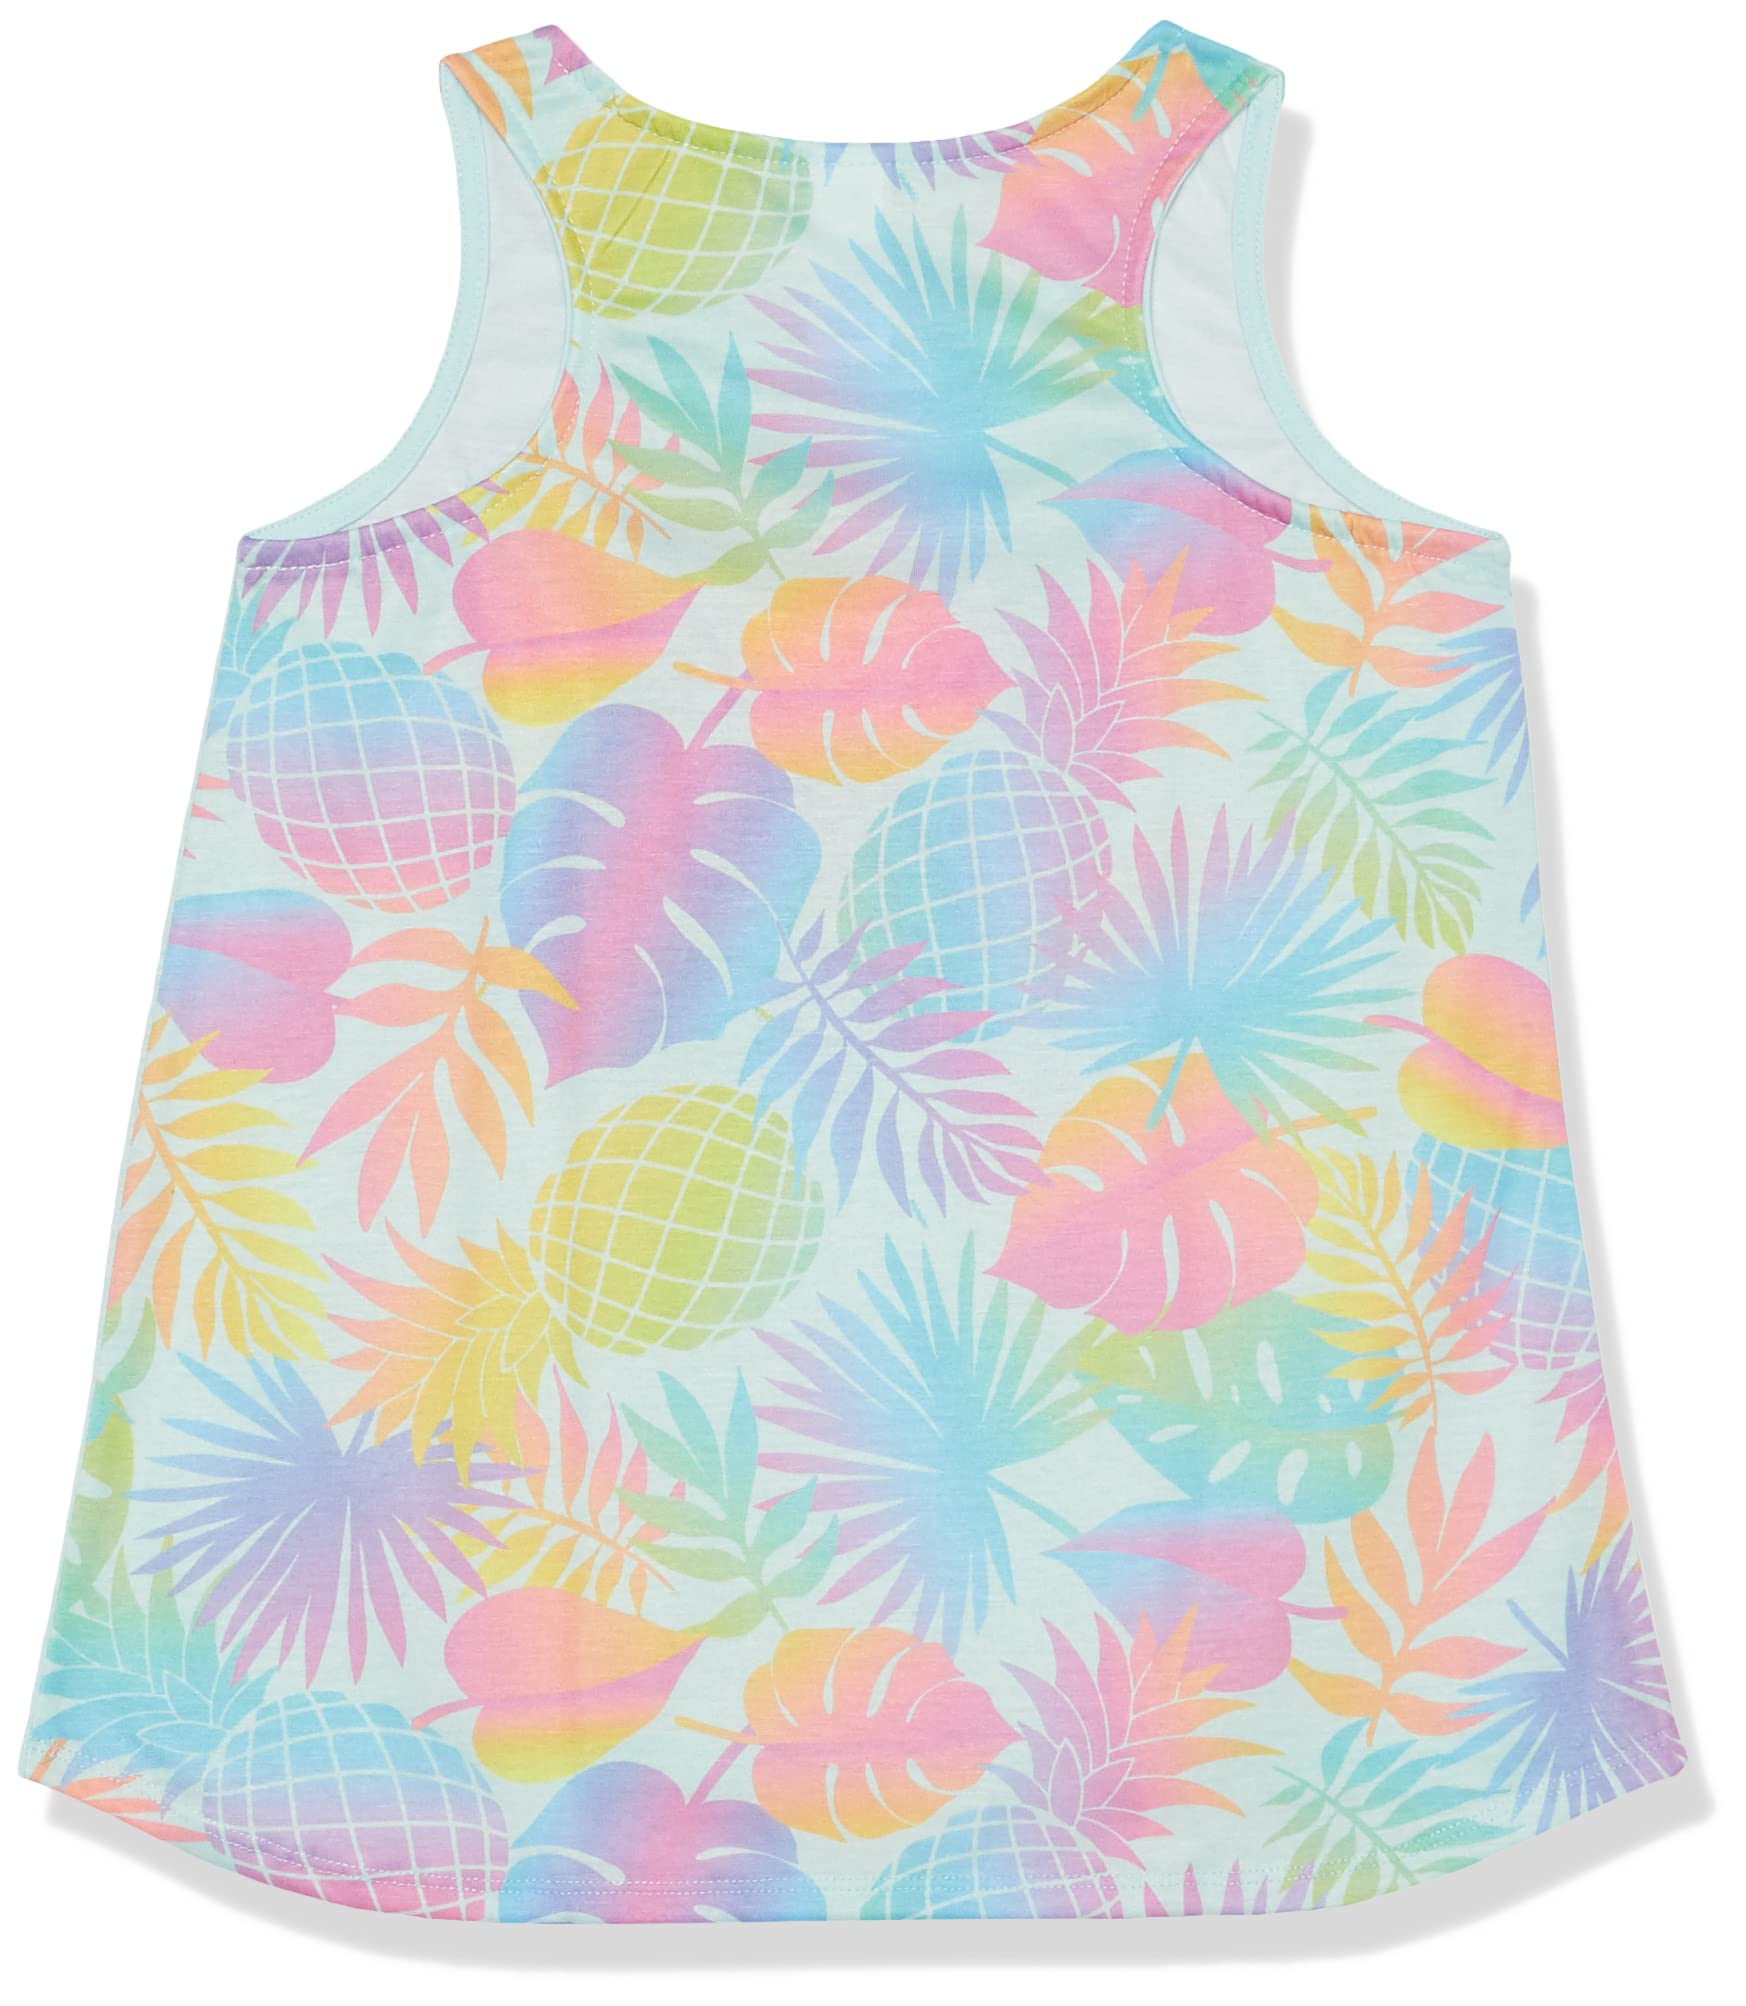 The Children's Place Girls' Sleeveless Tank Top and Shorts 2 Piece Pajama Set